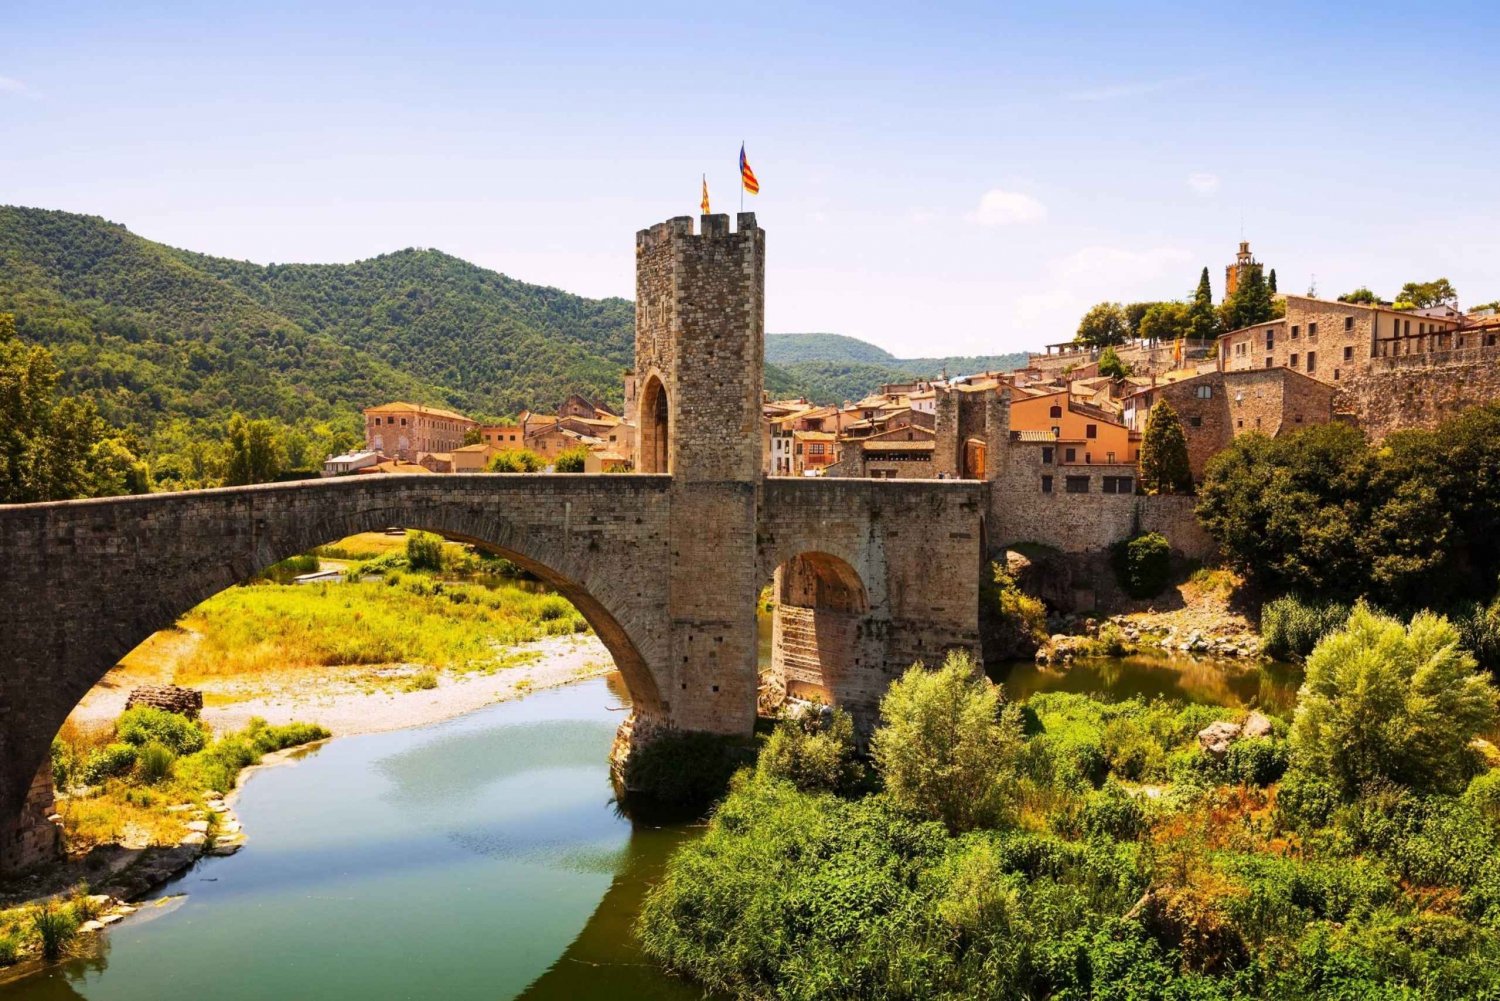 Besalú & Medieval Towns Tour with Hotel Pickup